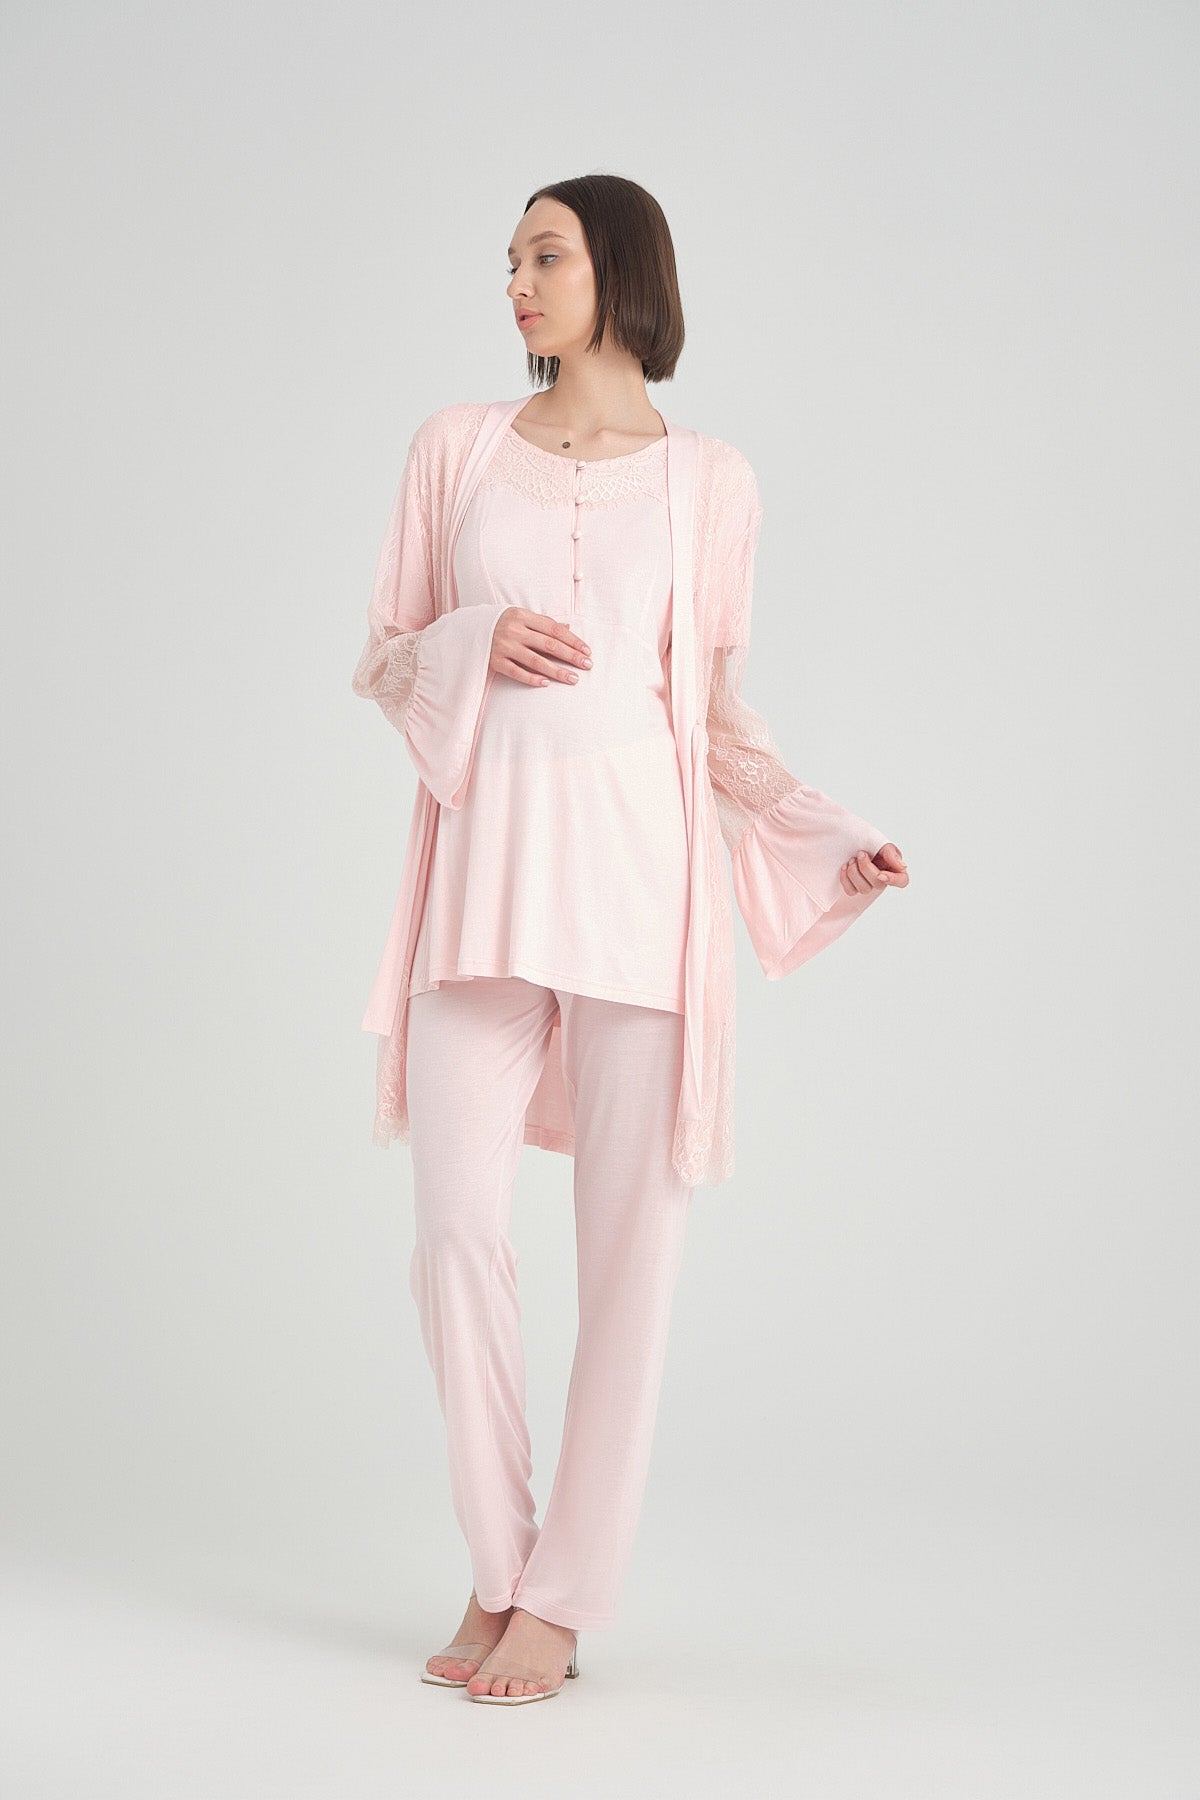 Shopymommy 2360 Lace 3-Pieces Maternity & Nursing Pajamas With Embroidered Robe Pink